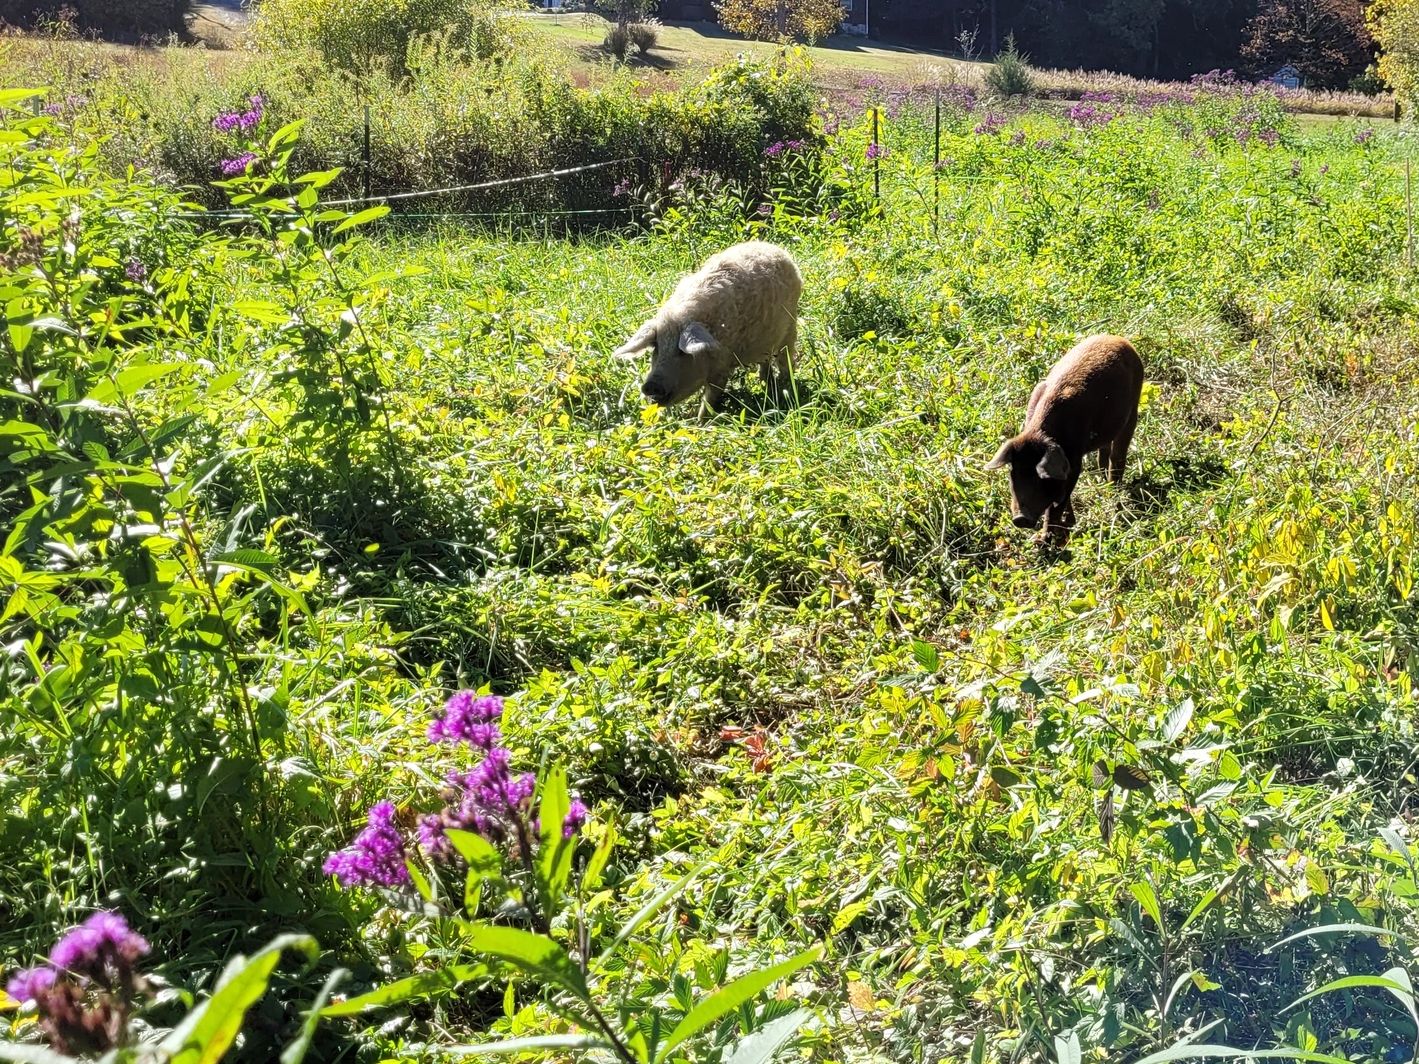 Raising Hogs on Woodland & Pasture, the way its meant to be! Nilly & Pomegranate foraging the field.